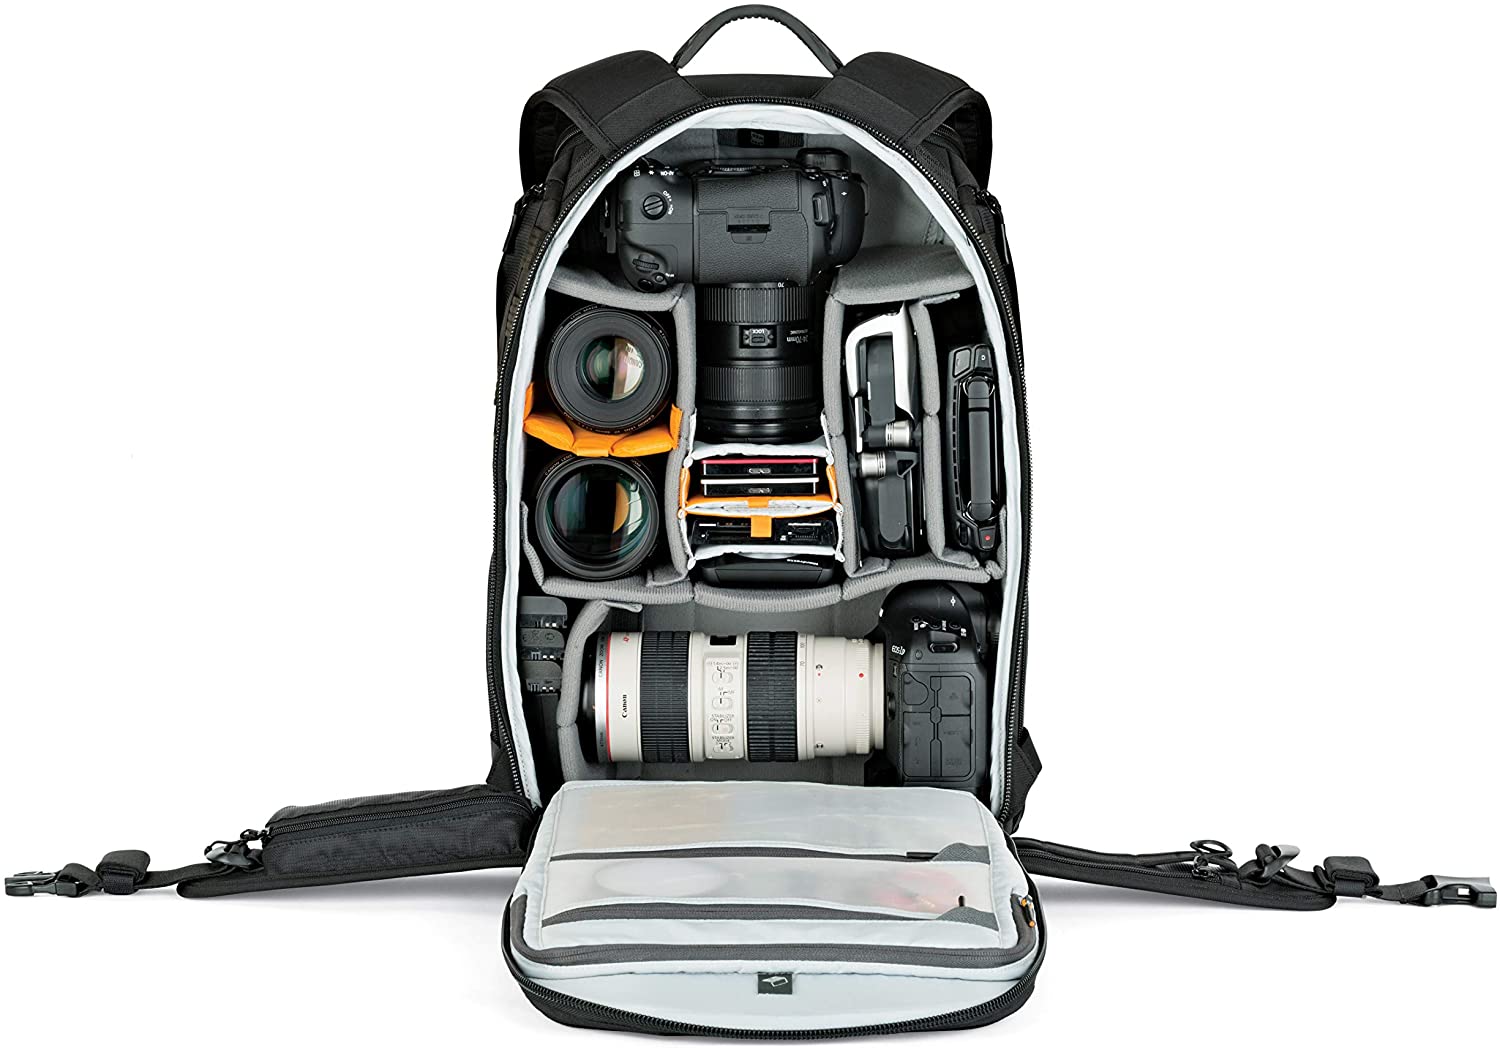 Lowepro Pro Tactic 450 AW II- One of the best video camera bags for outdoors